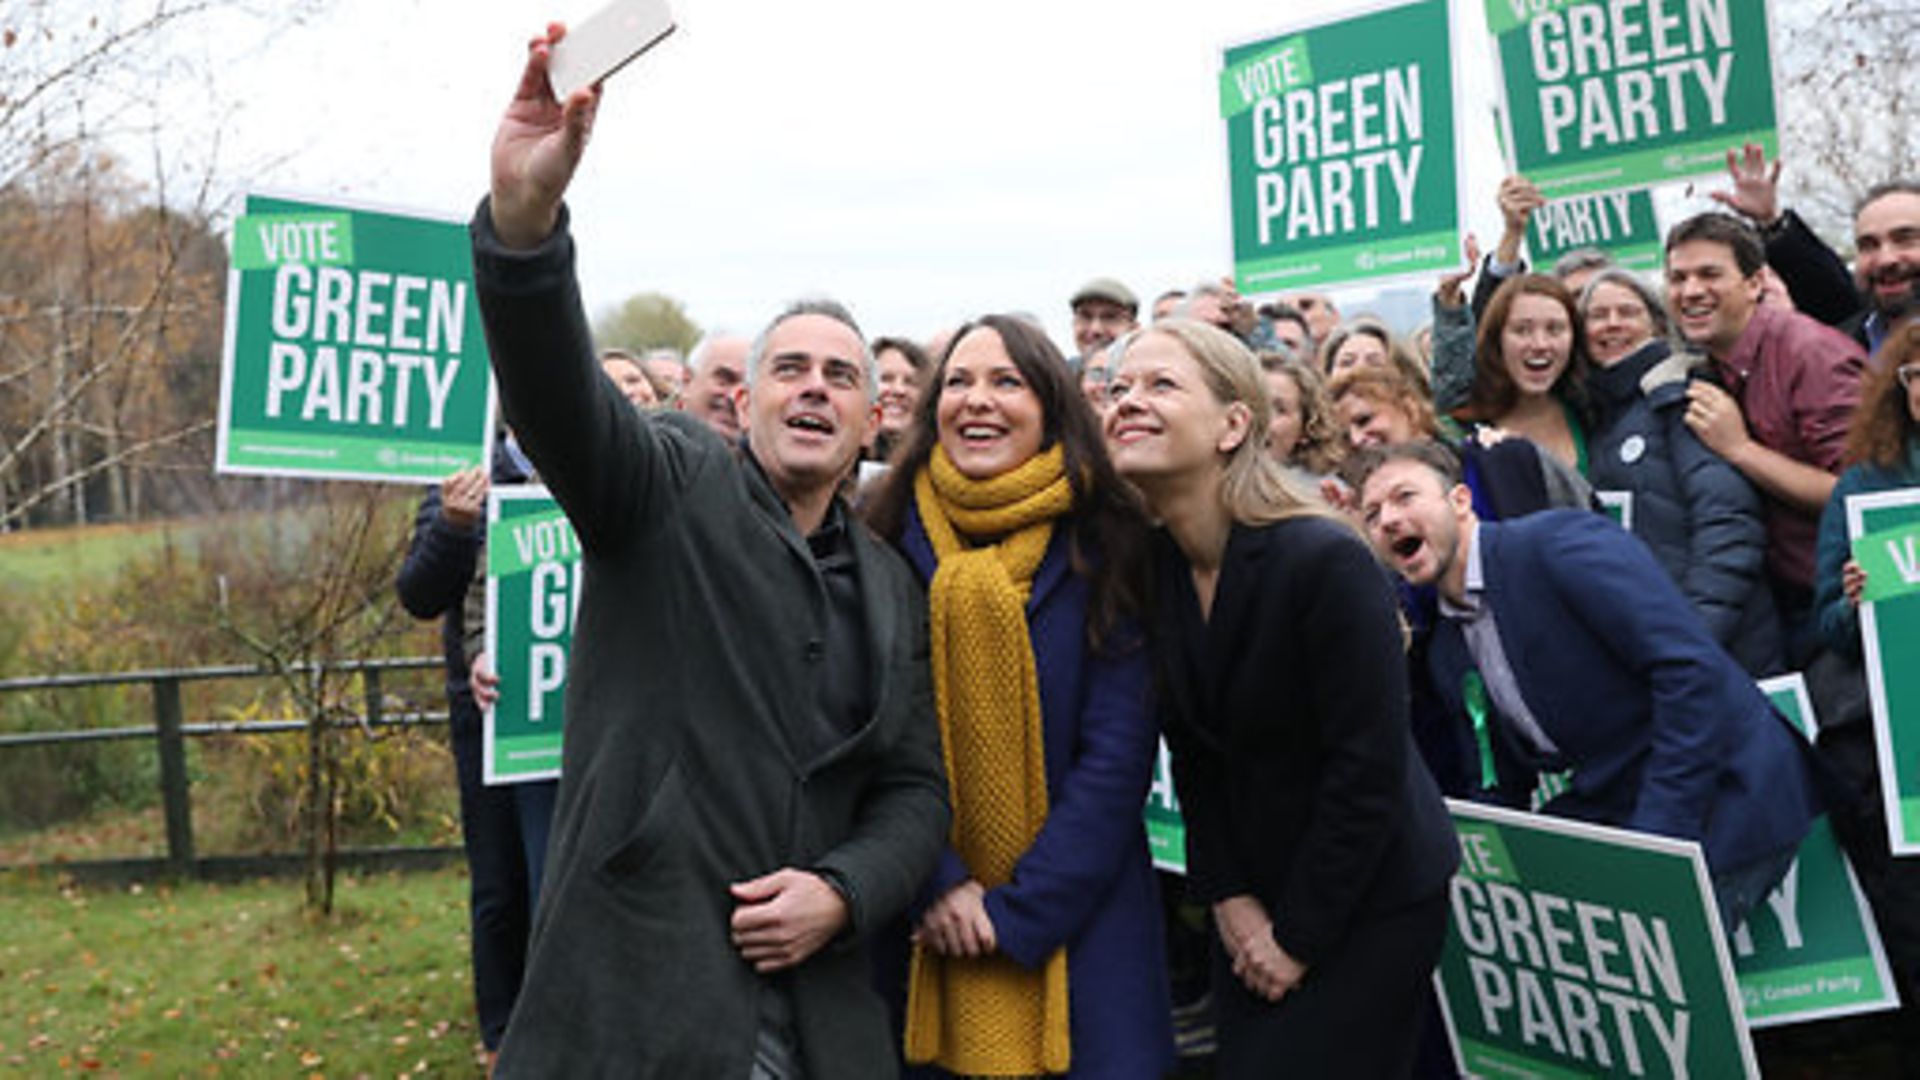 (left to right) Green Party Co-Leader Jonathan Bartley, Deputy leader Amelia Womack and Co-Leader Sian Berry - Credit: PA